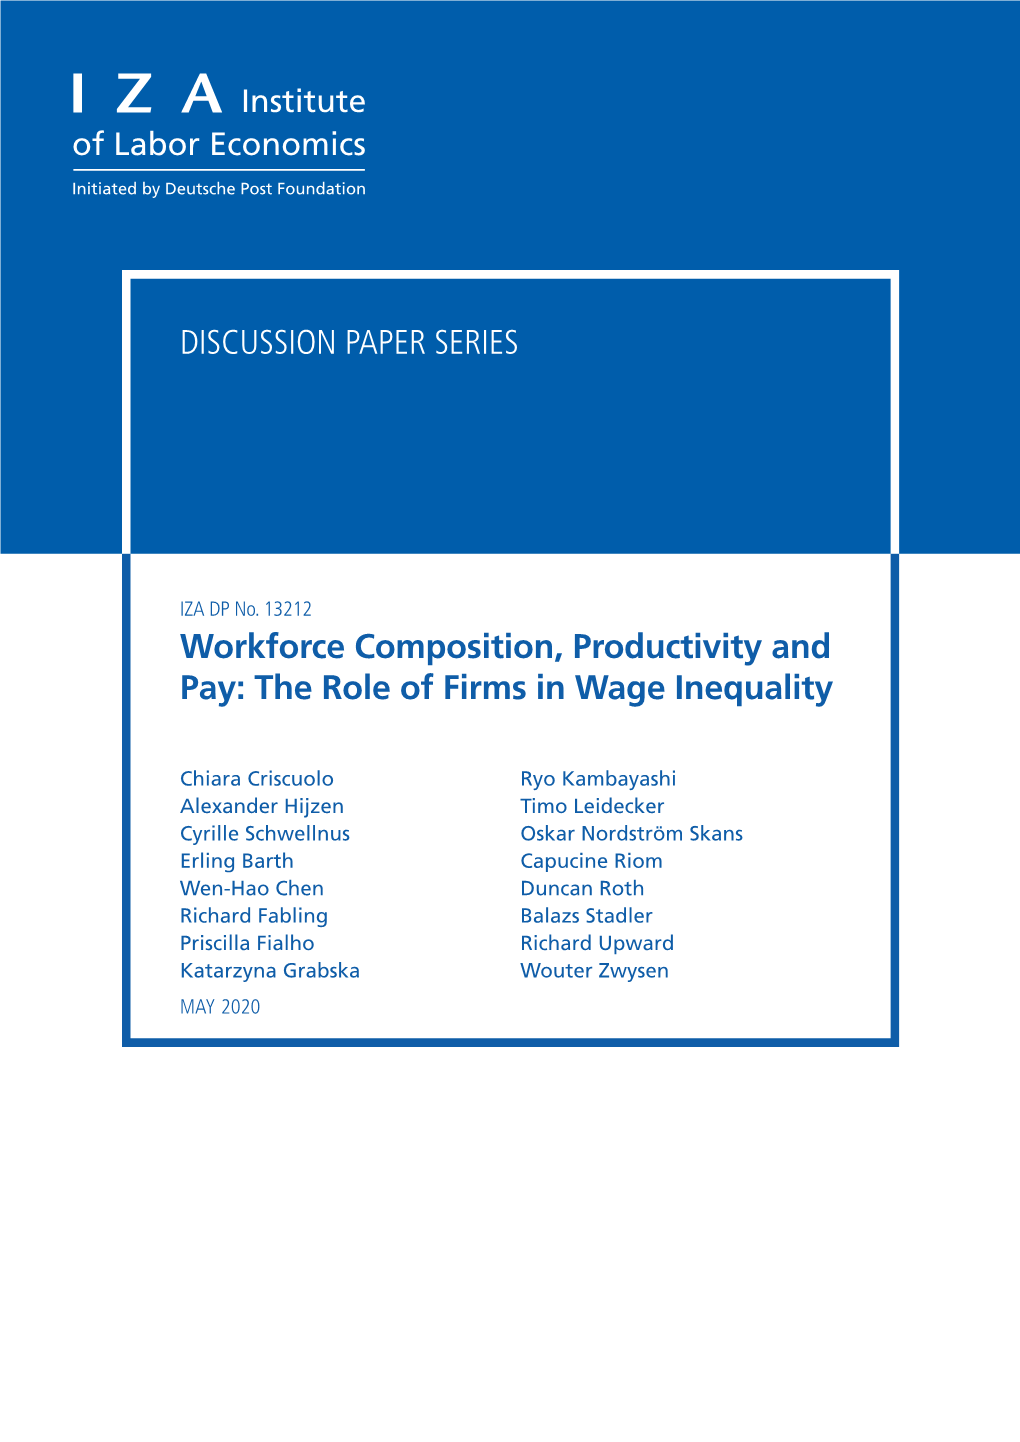 Workforce Composition, Productivity and Pay: the Role of Firms in Wage Inequality